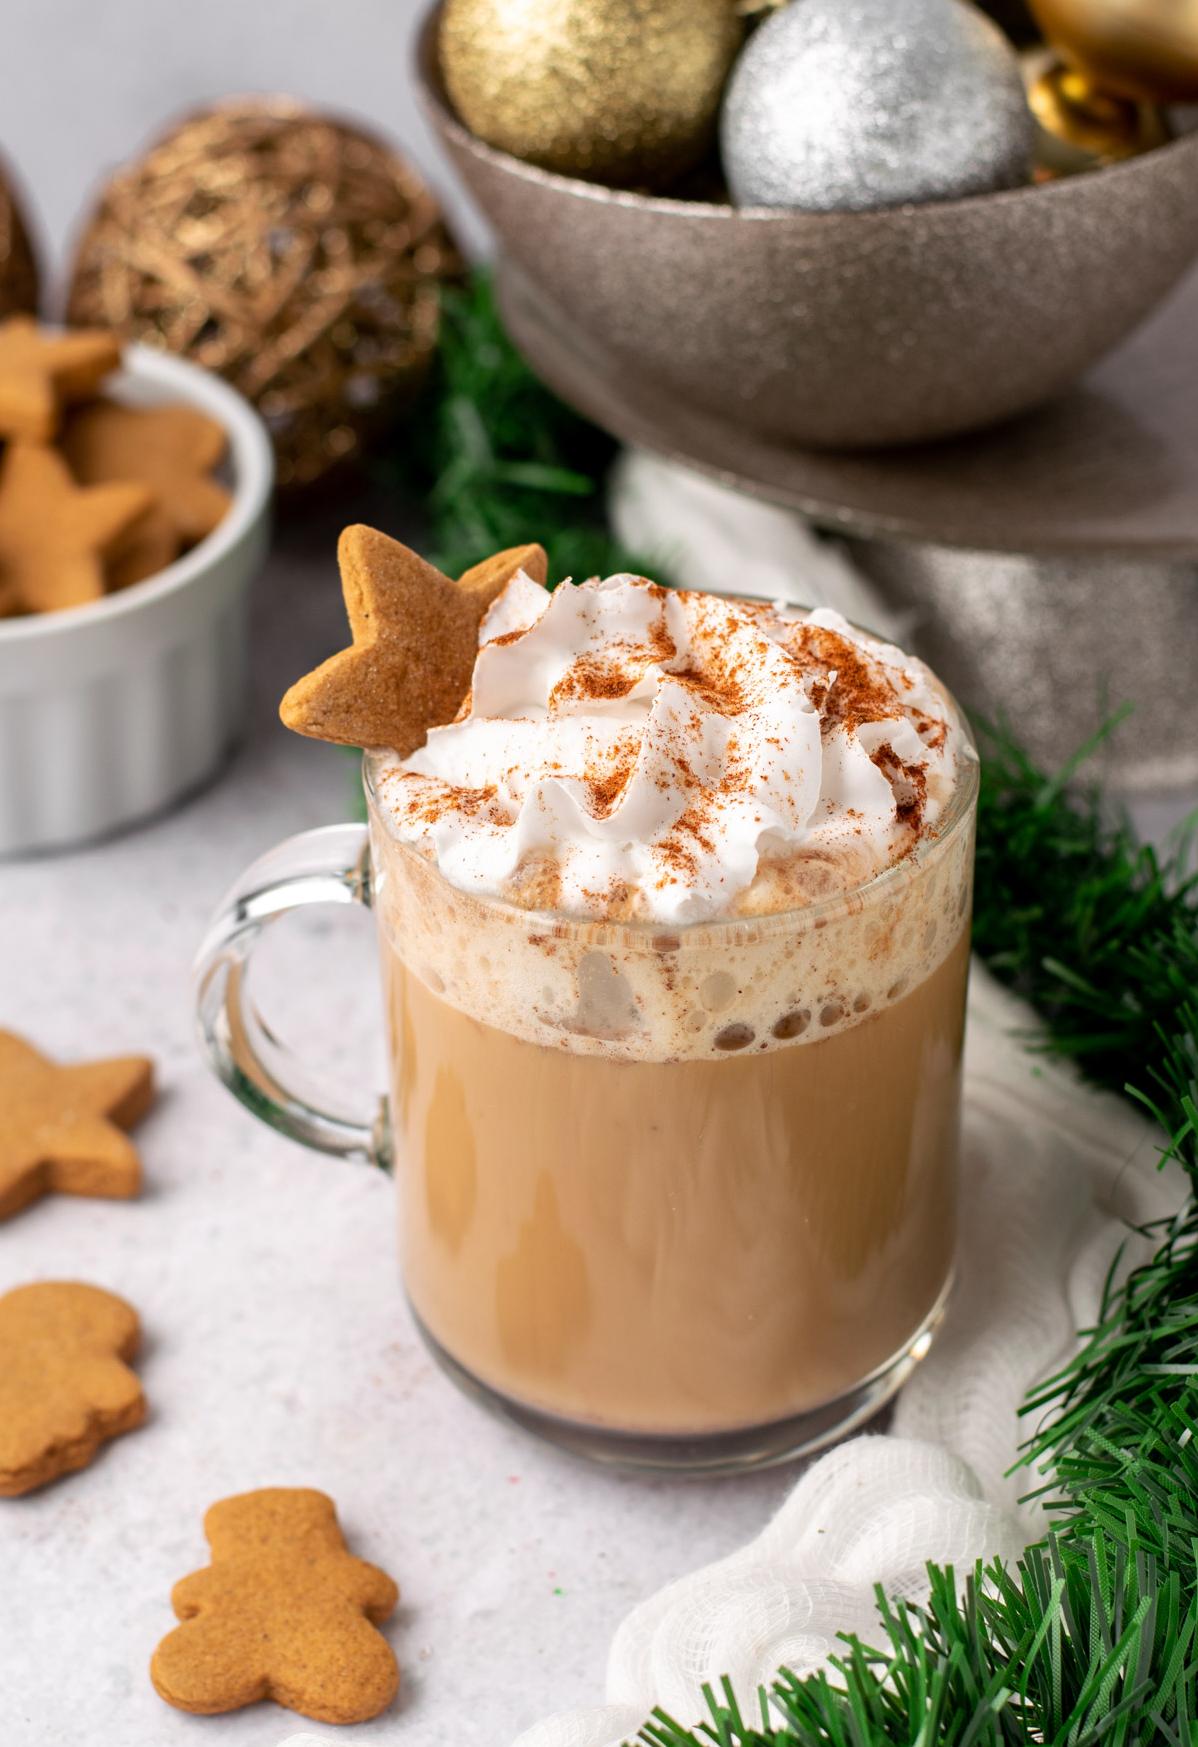  Get your gingerbread fix in a new way with this sweet, spiced latte.